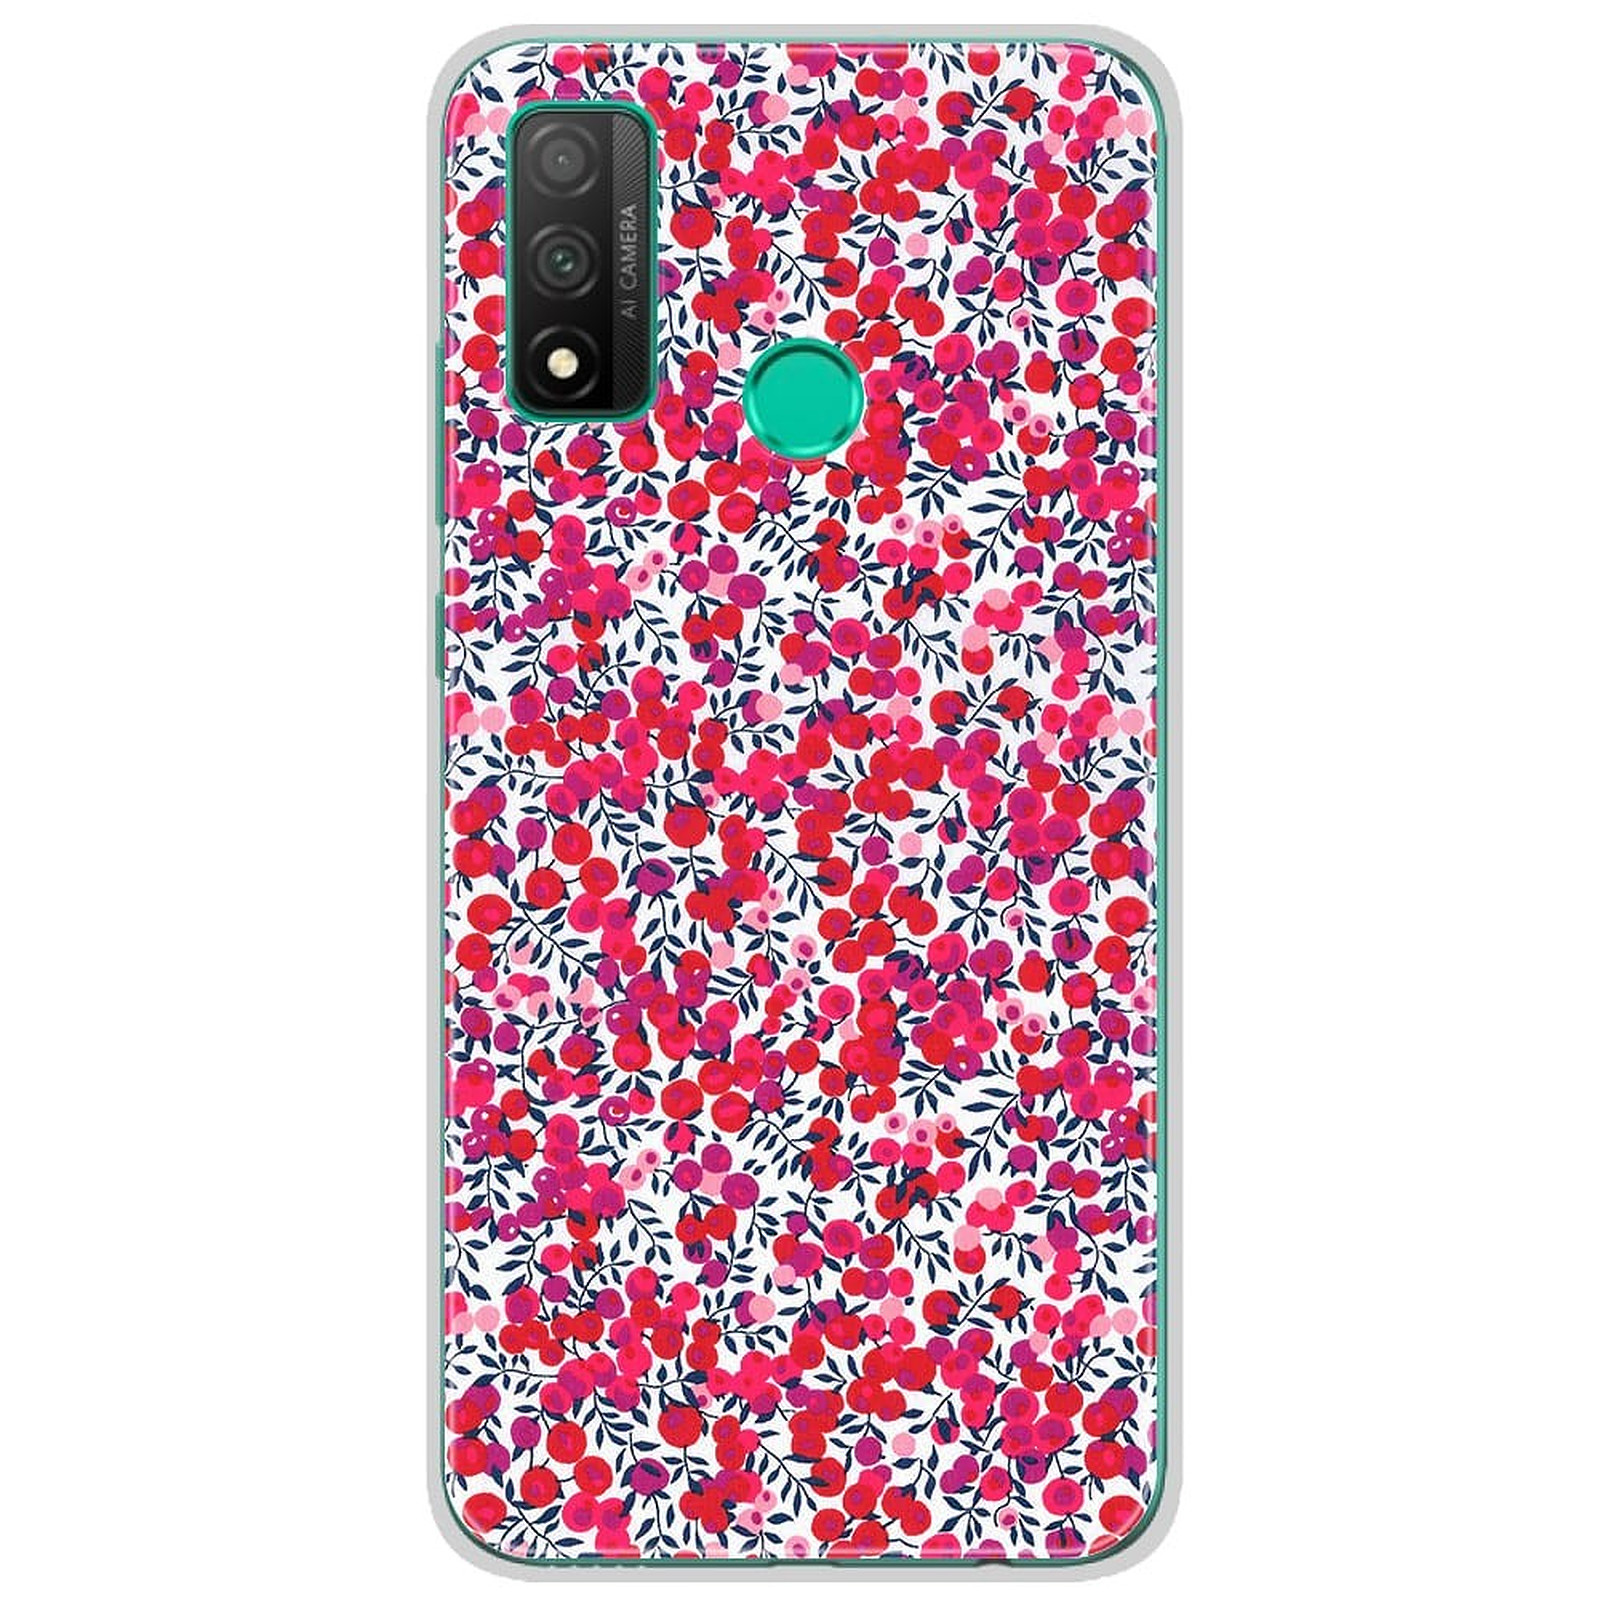 1001 Coques Coque silicone gel Huawei P Smart 2020 motif Liberty Wiltshire Rouge - Coque telephone 1001Coques